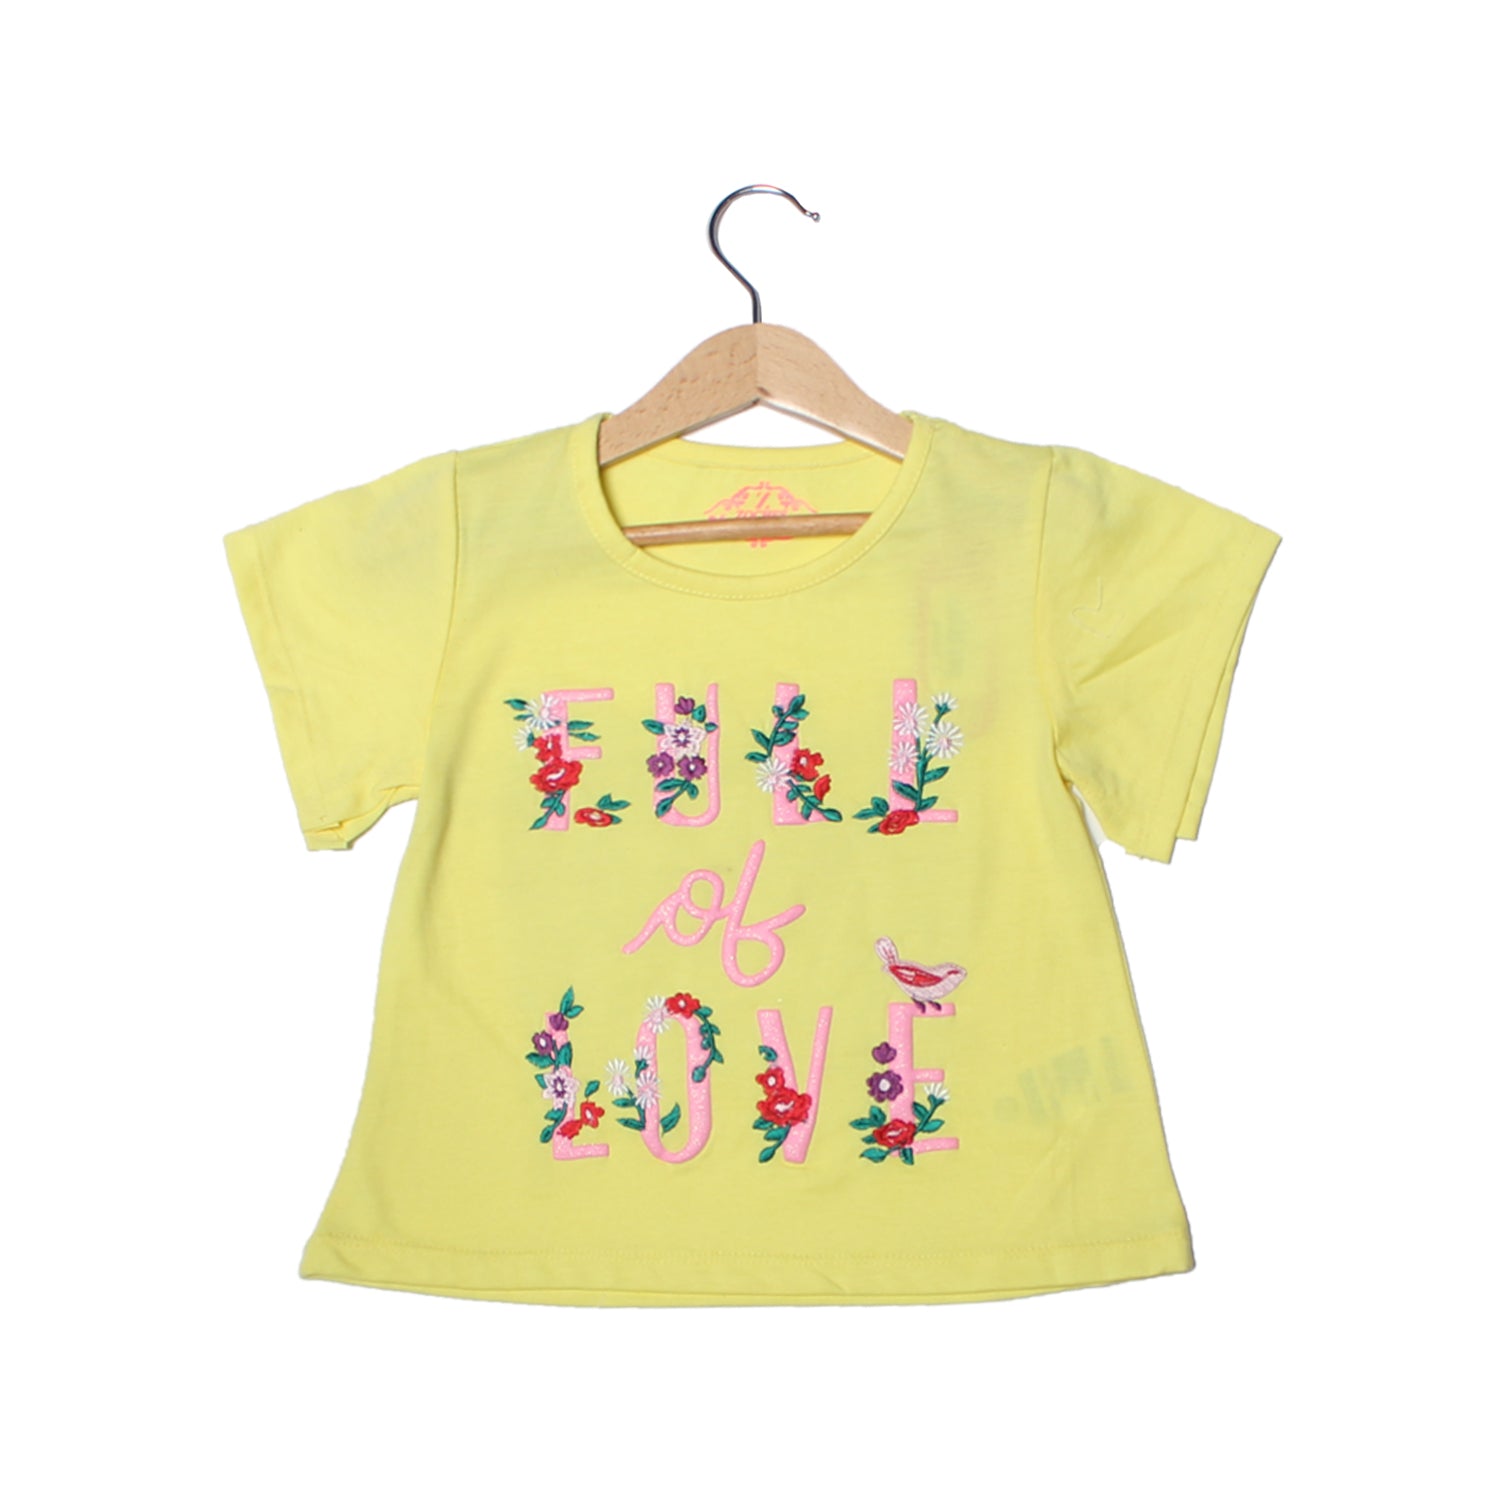 NEW YELLOW FULL OF LOVE PRINTED T-SHIRT TOP FOR GIRLS